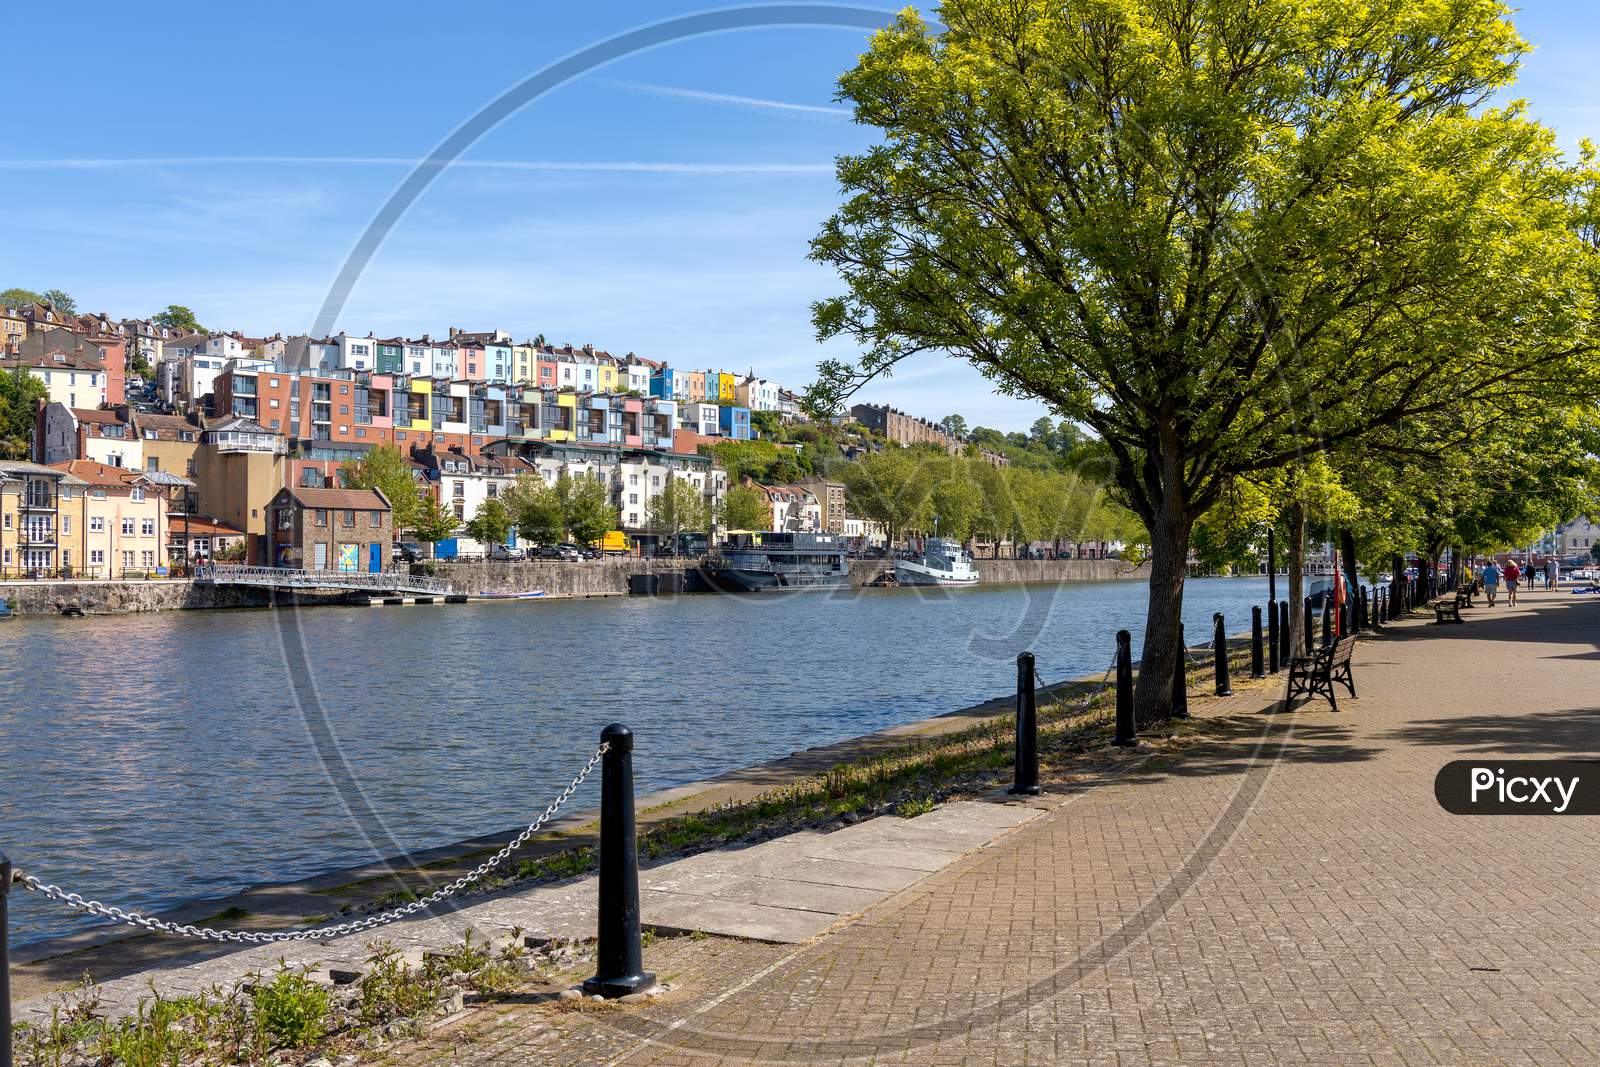 Bristol, Uk - May 14 : View Of Boats And Colourful Apartments Along The River Avon In Bristol On May 14, 2019. Unidentified People